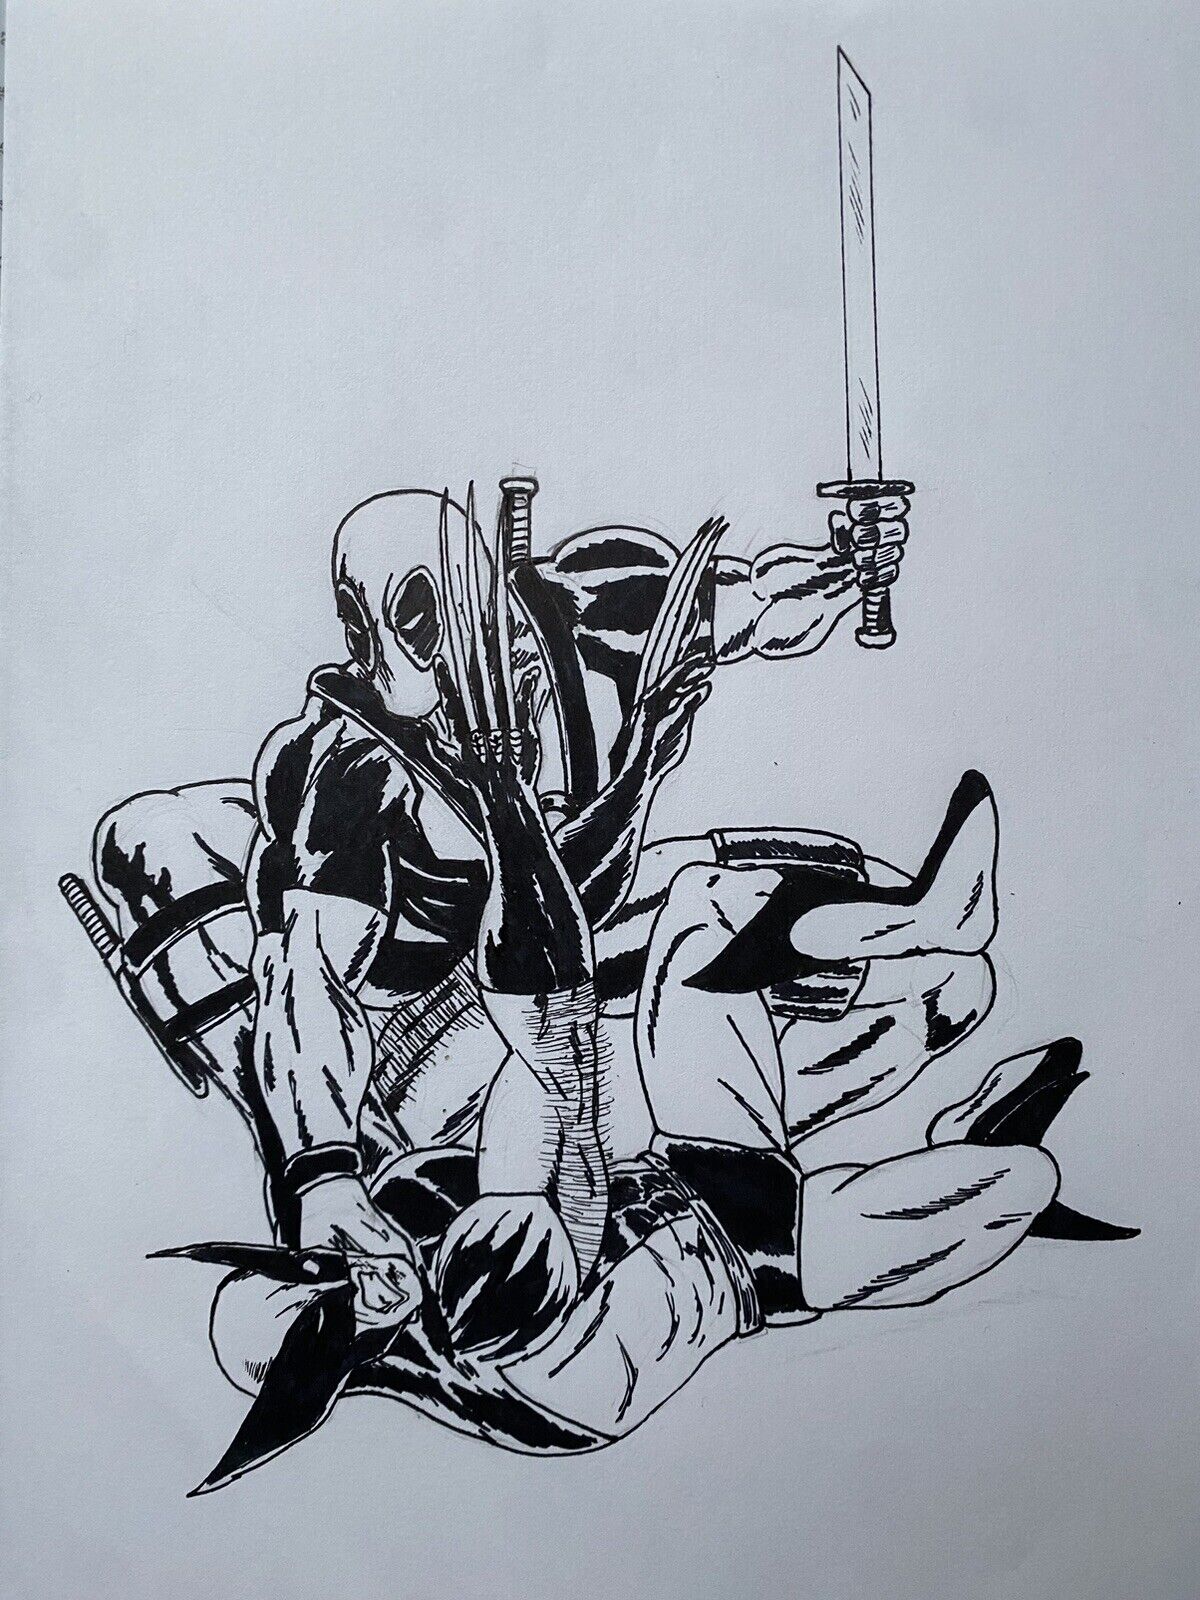 Deadpool & Wolverine Original Art On 8x11 Inch Paper Made With Pencil And Inks 